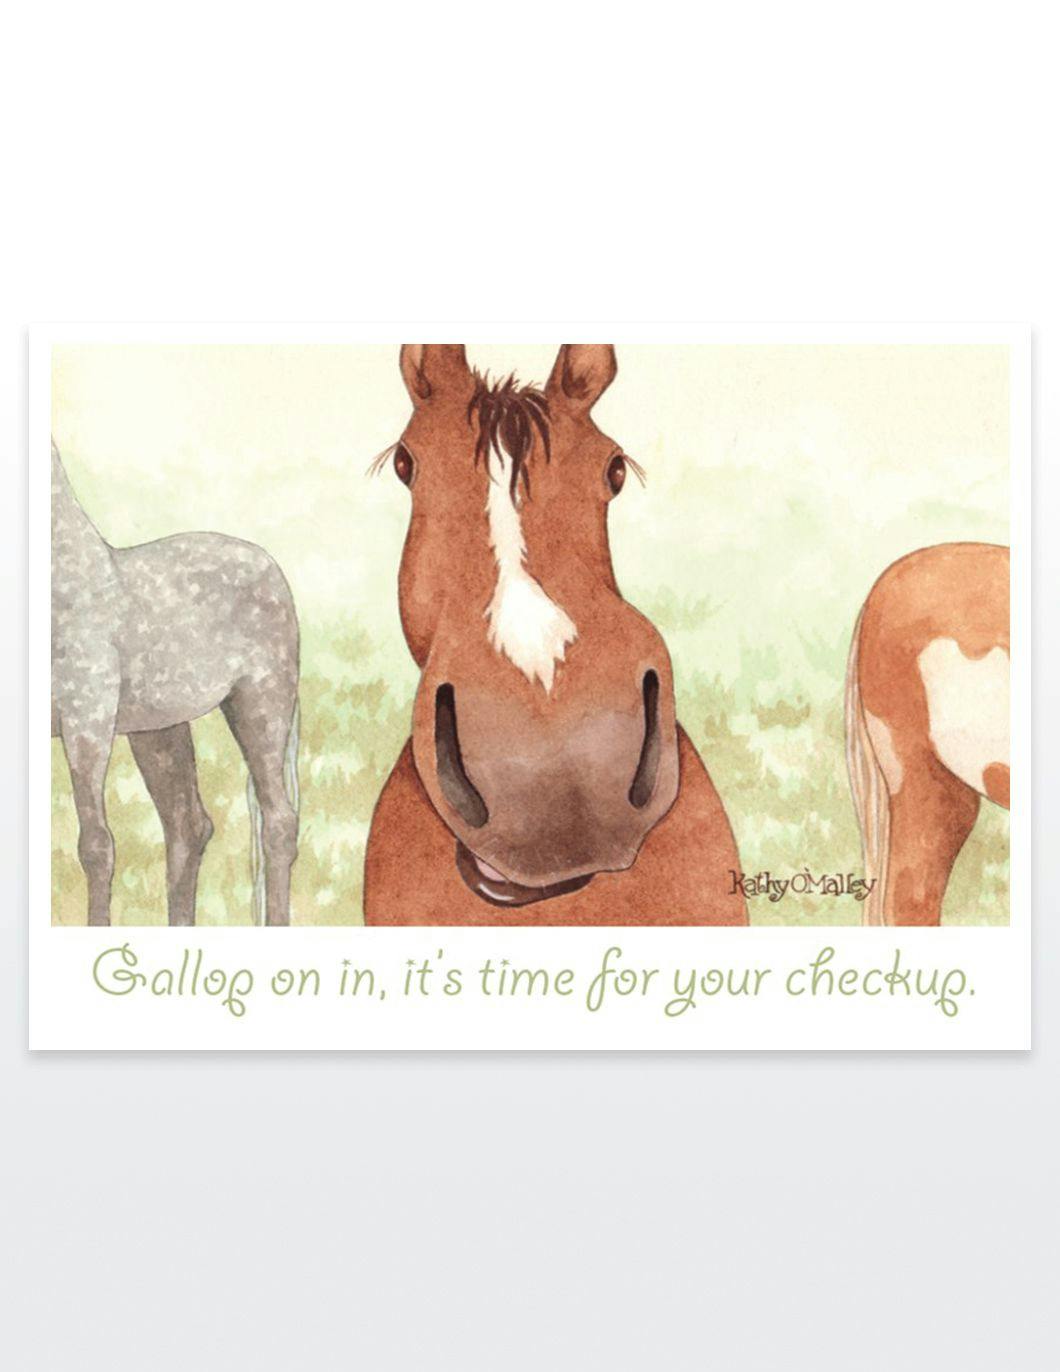 gallop-on-in-postcards